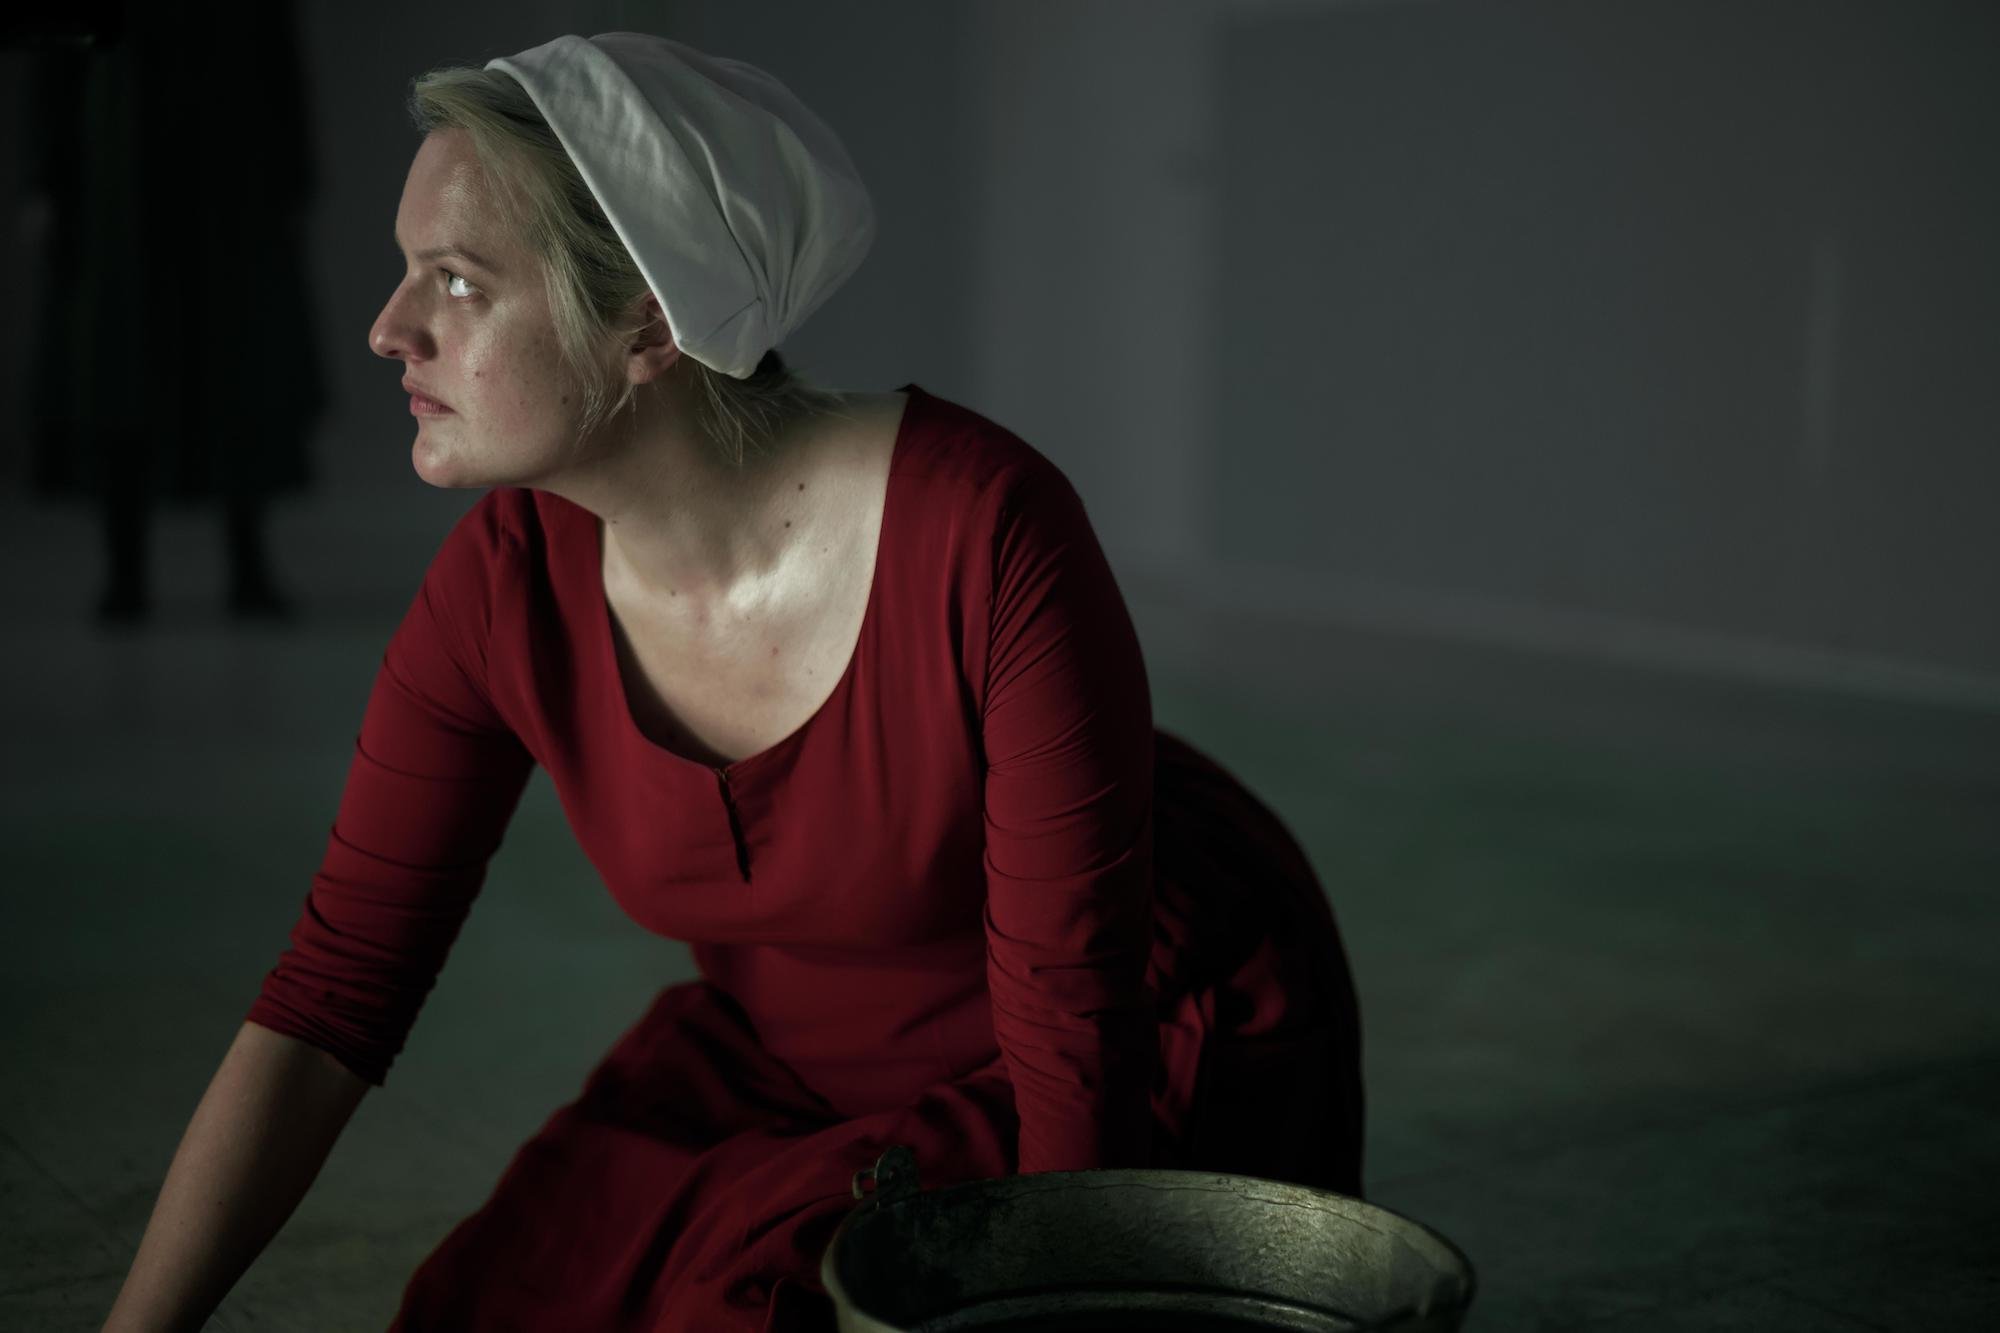 ‘The Handmaid’s Tale’ Author Yelled About Some Developments in the Show